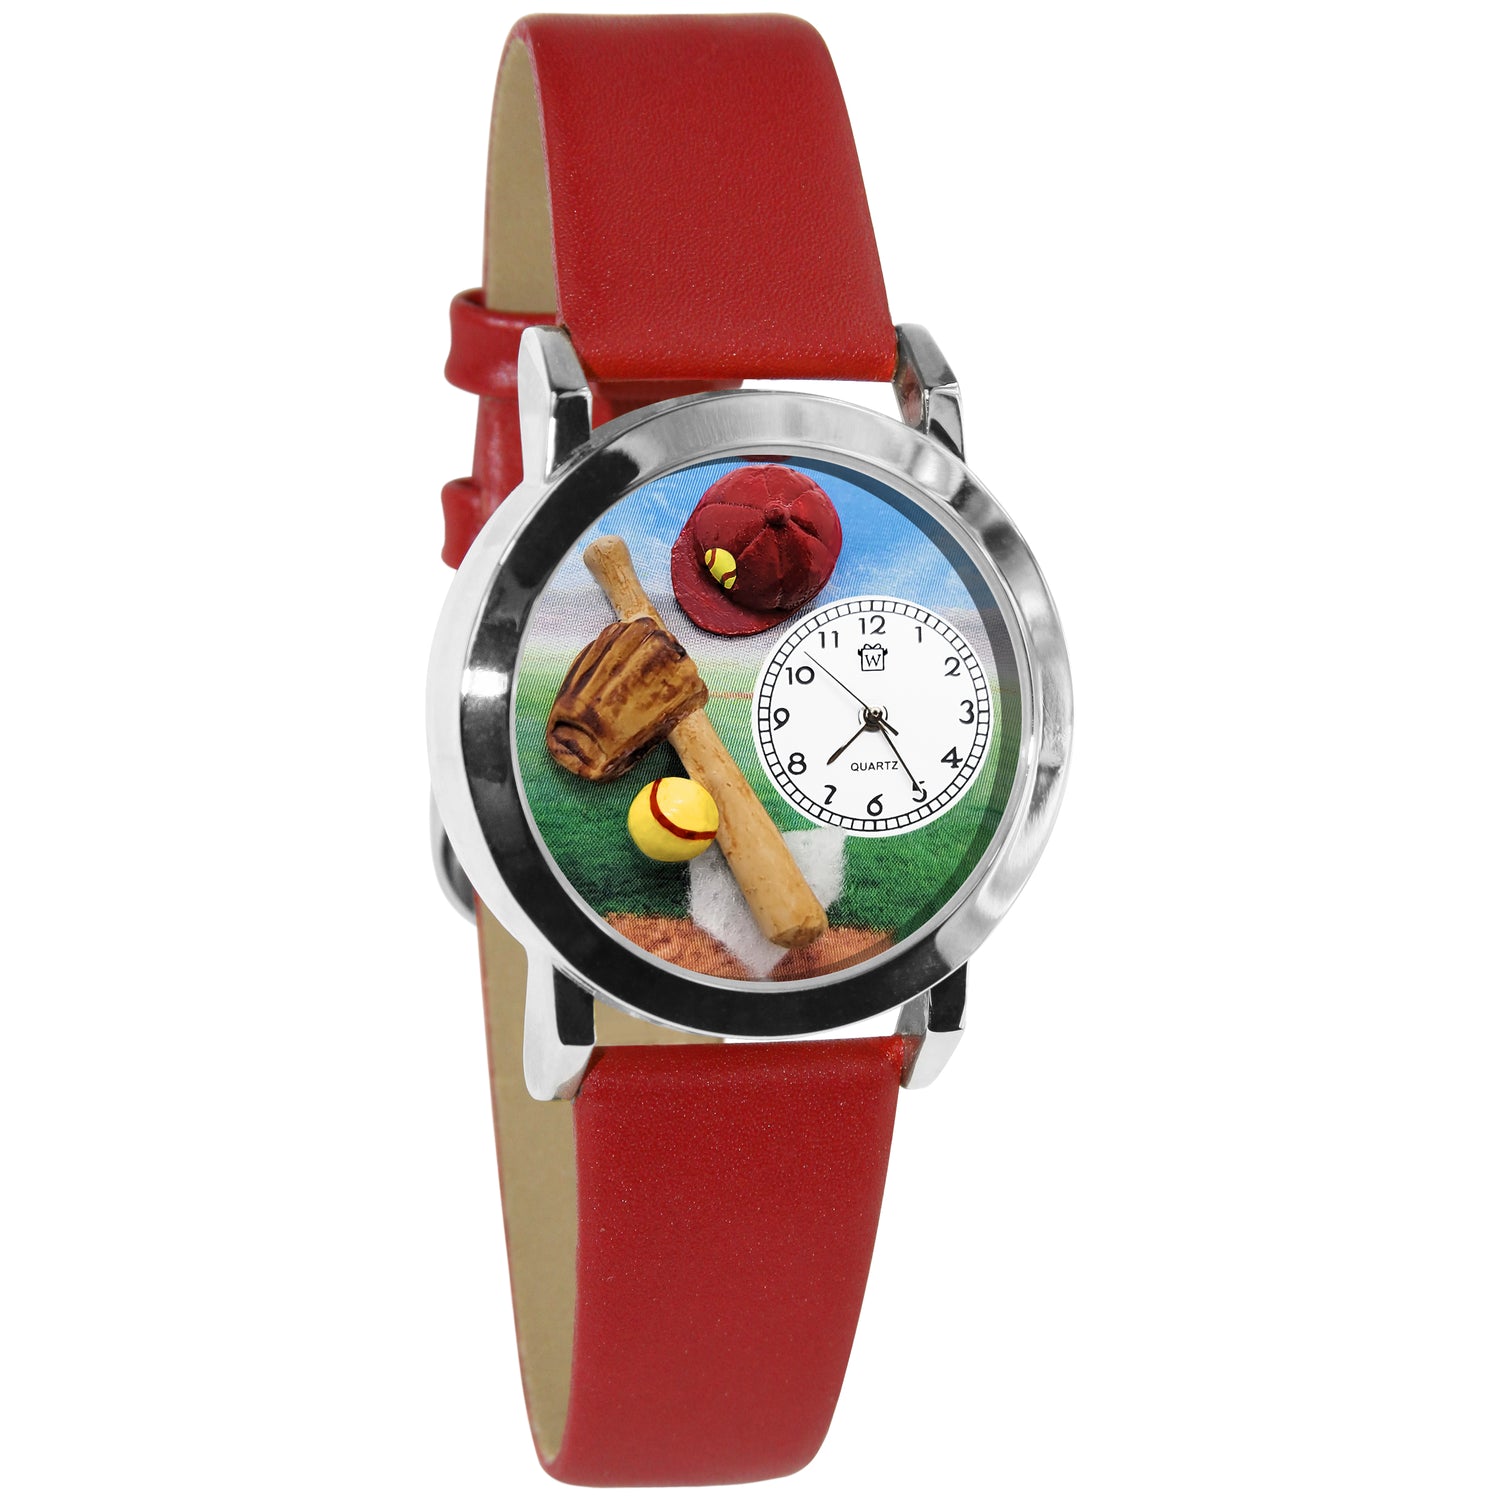 Whimsical Gifts | Softball 3D Watch Small Style | Handmade in USA | Hobbies & Special Interests | Sports | Novelty Unique Fun Miniatures Gift | Sivler Finish Red Leather Watch Band